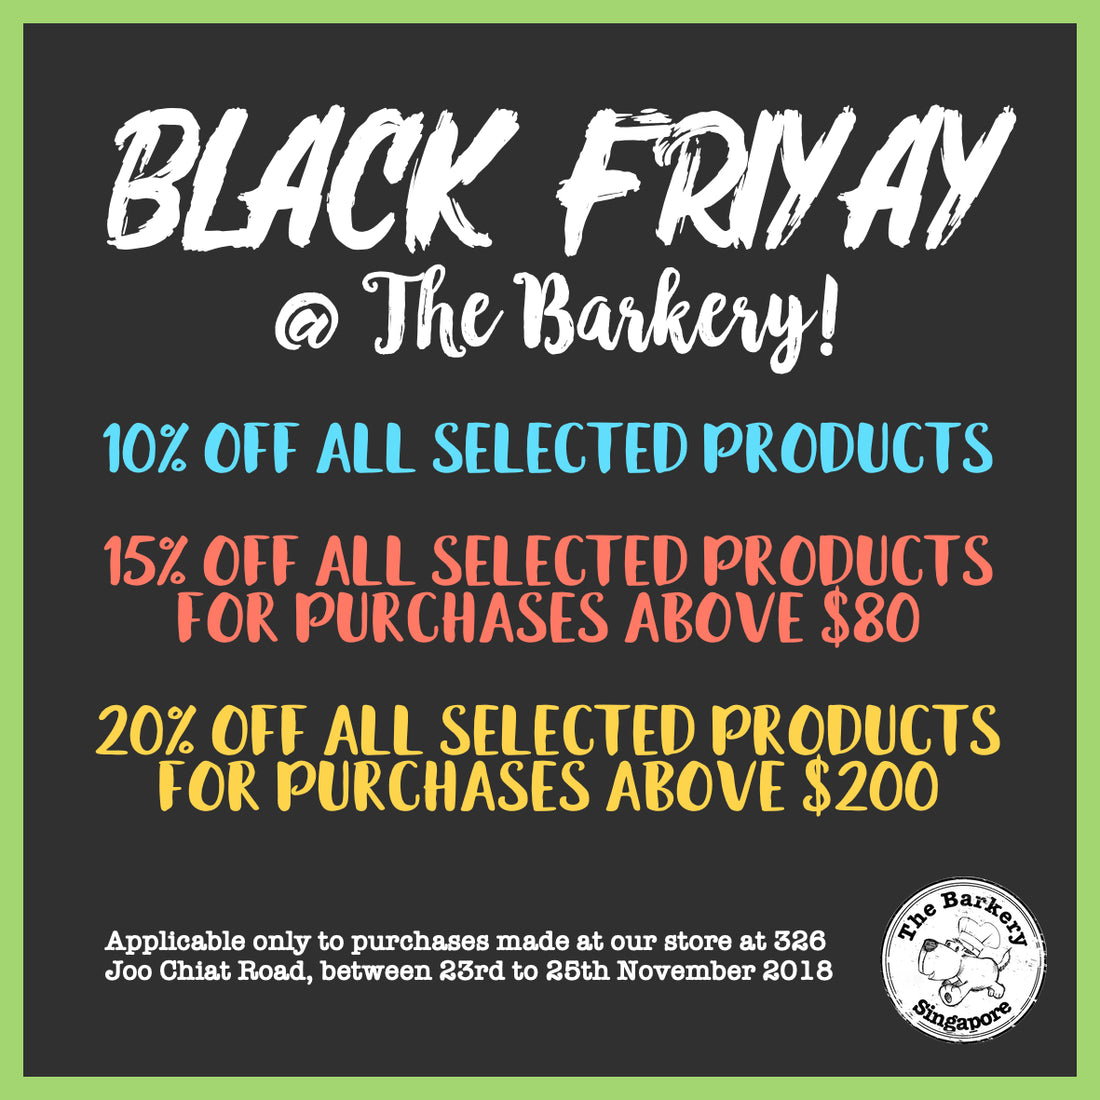 2018 Black Friday and Cyber Monday @ The Barkery!